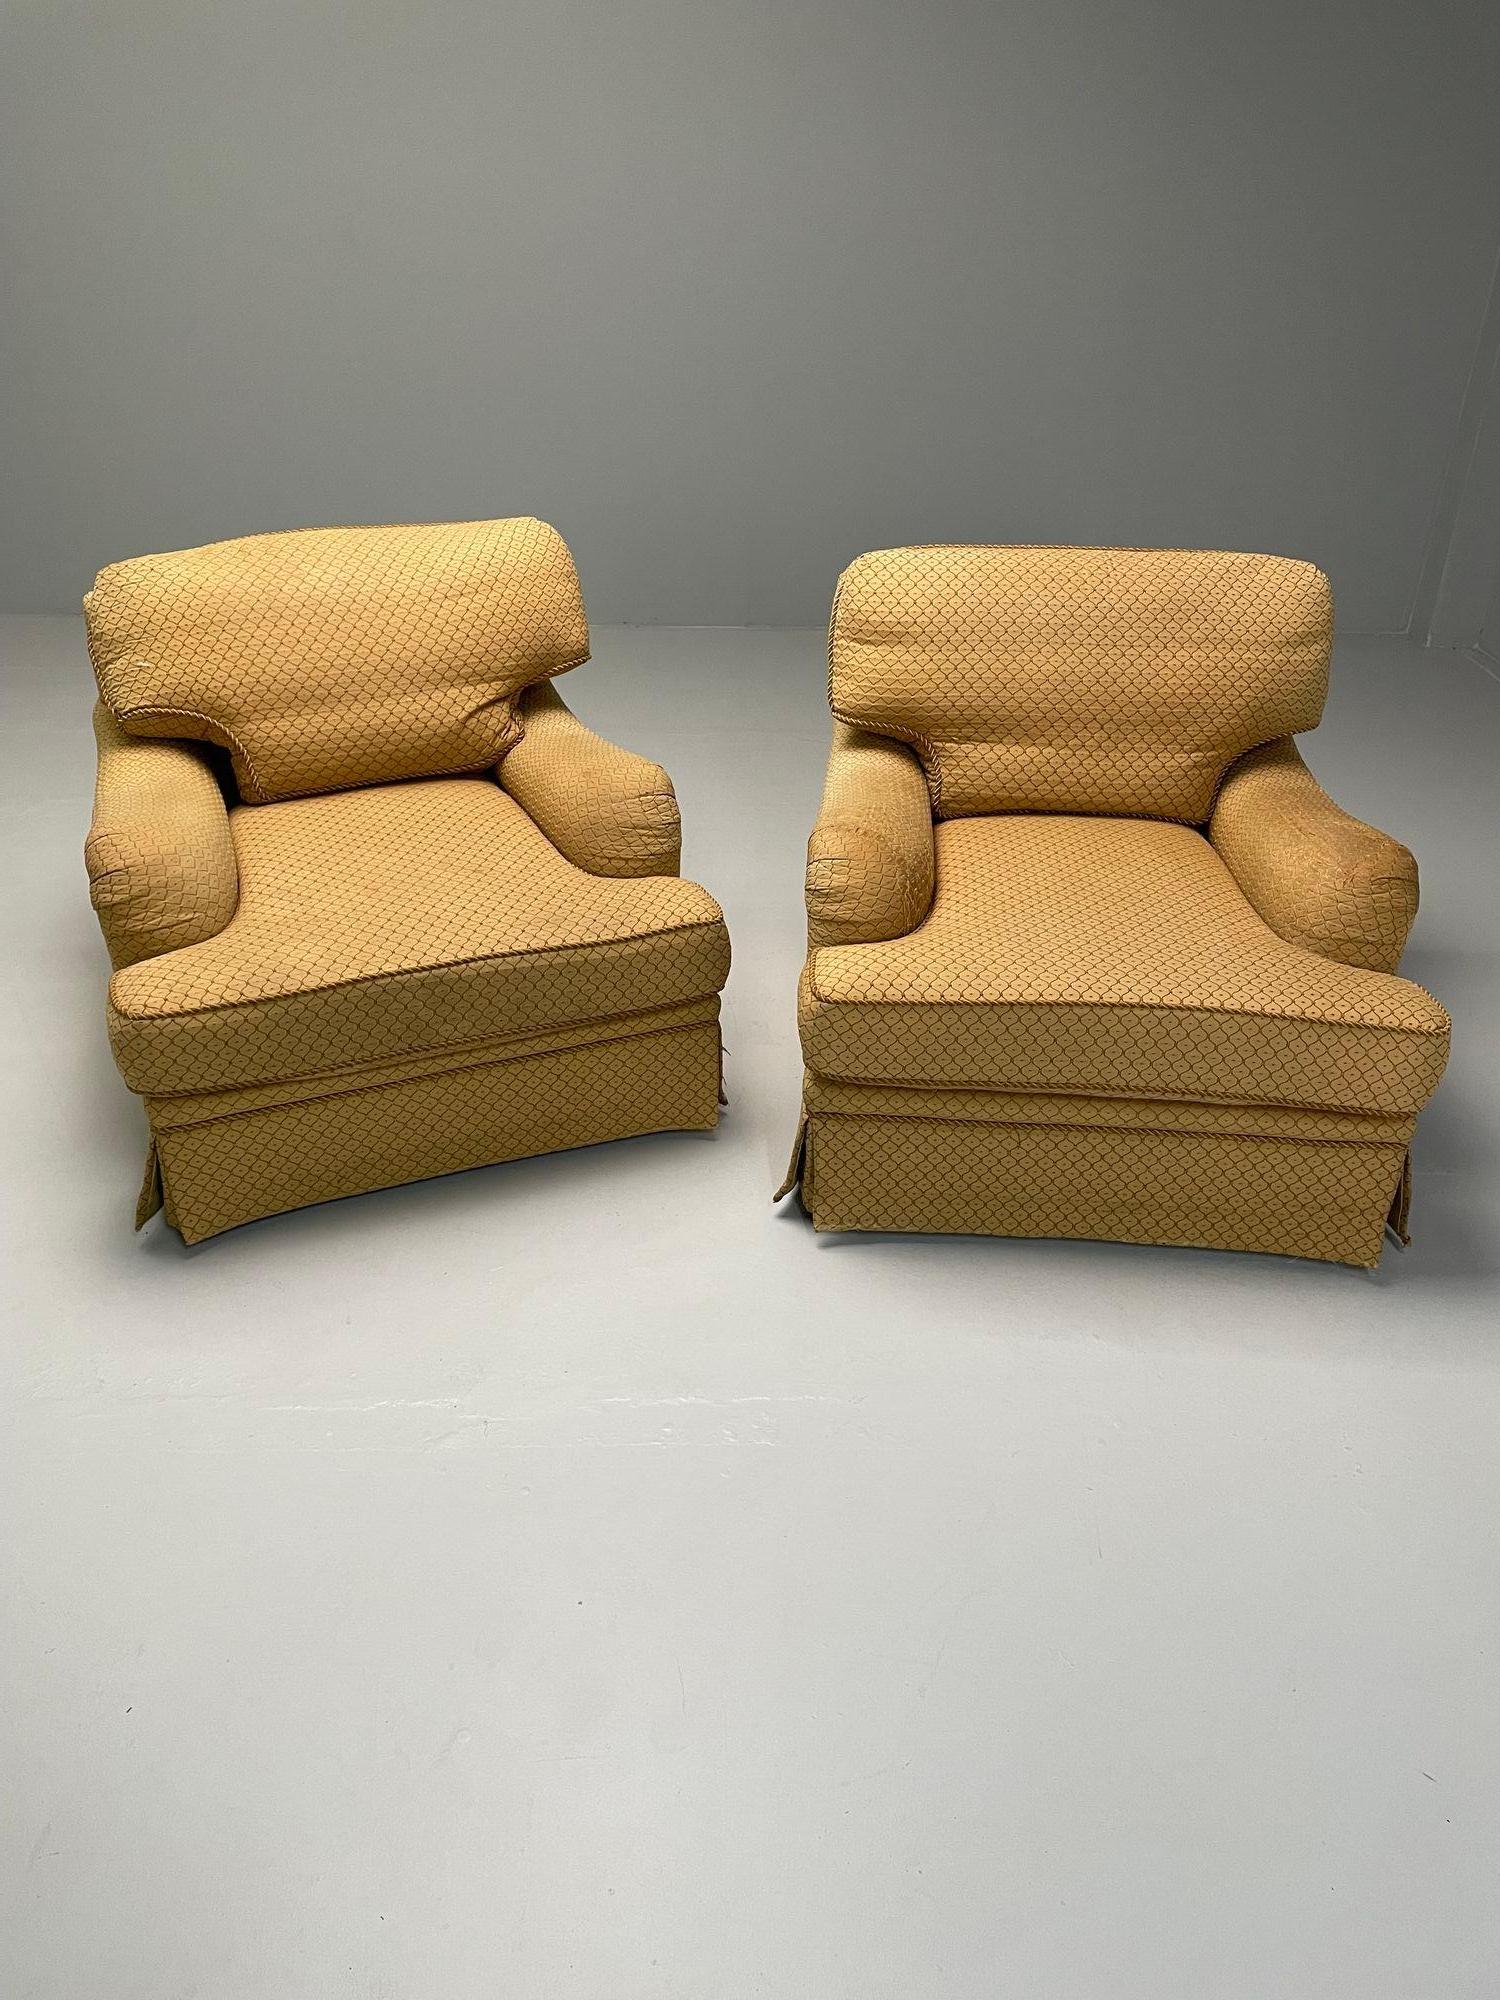 Baker, Traditional Style, Large Swivel Chairs, Beige Fabric, Re-Upholstery

Pair of very large Baker (labeled) traditional lounge chairs with scroll arms and wooden swivel bases. One chair has a worn/frayed set of arms. Price is reflective of the